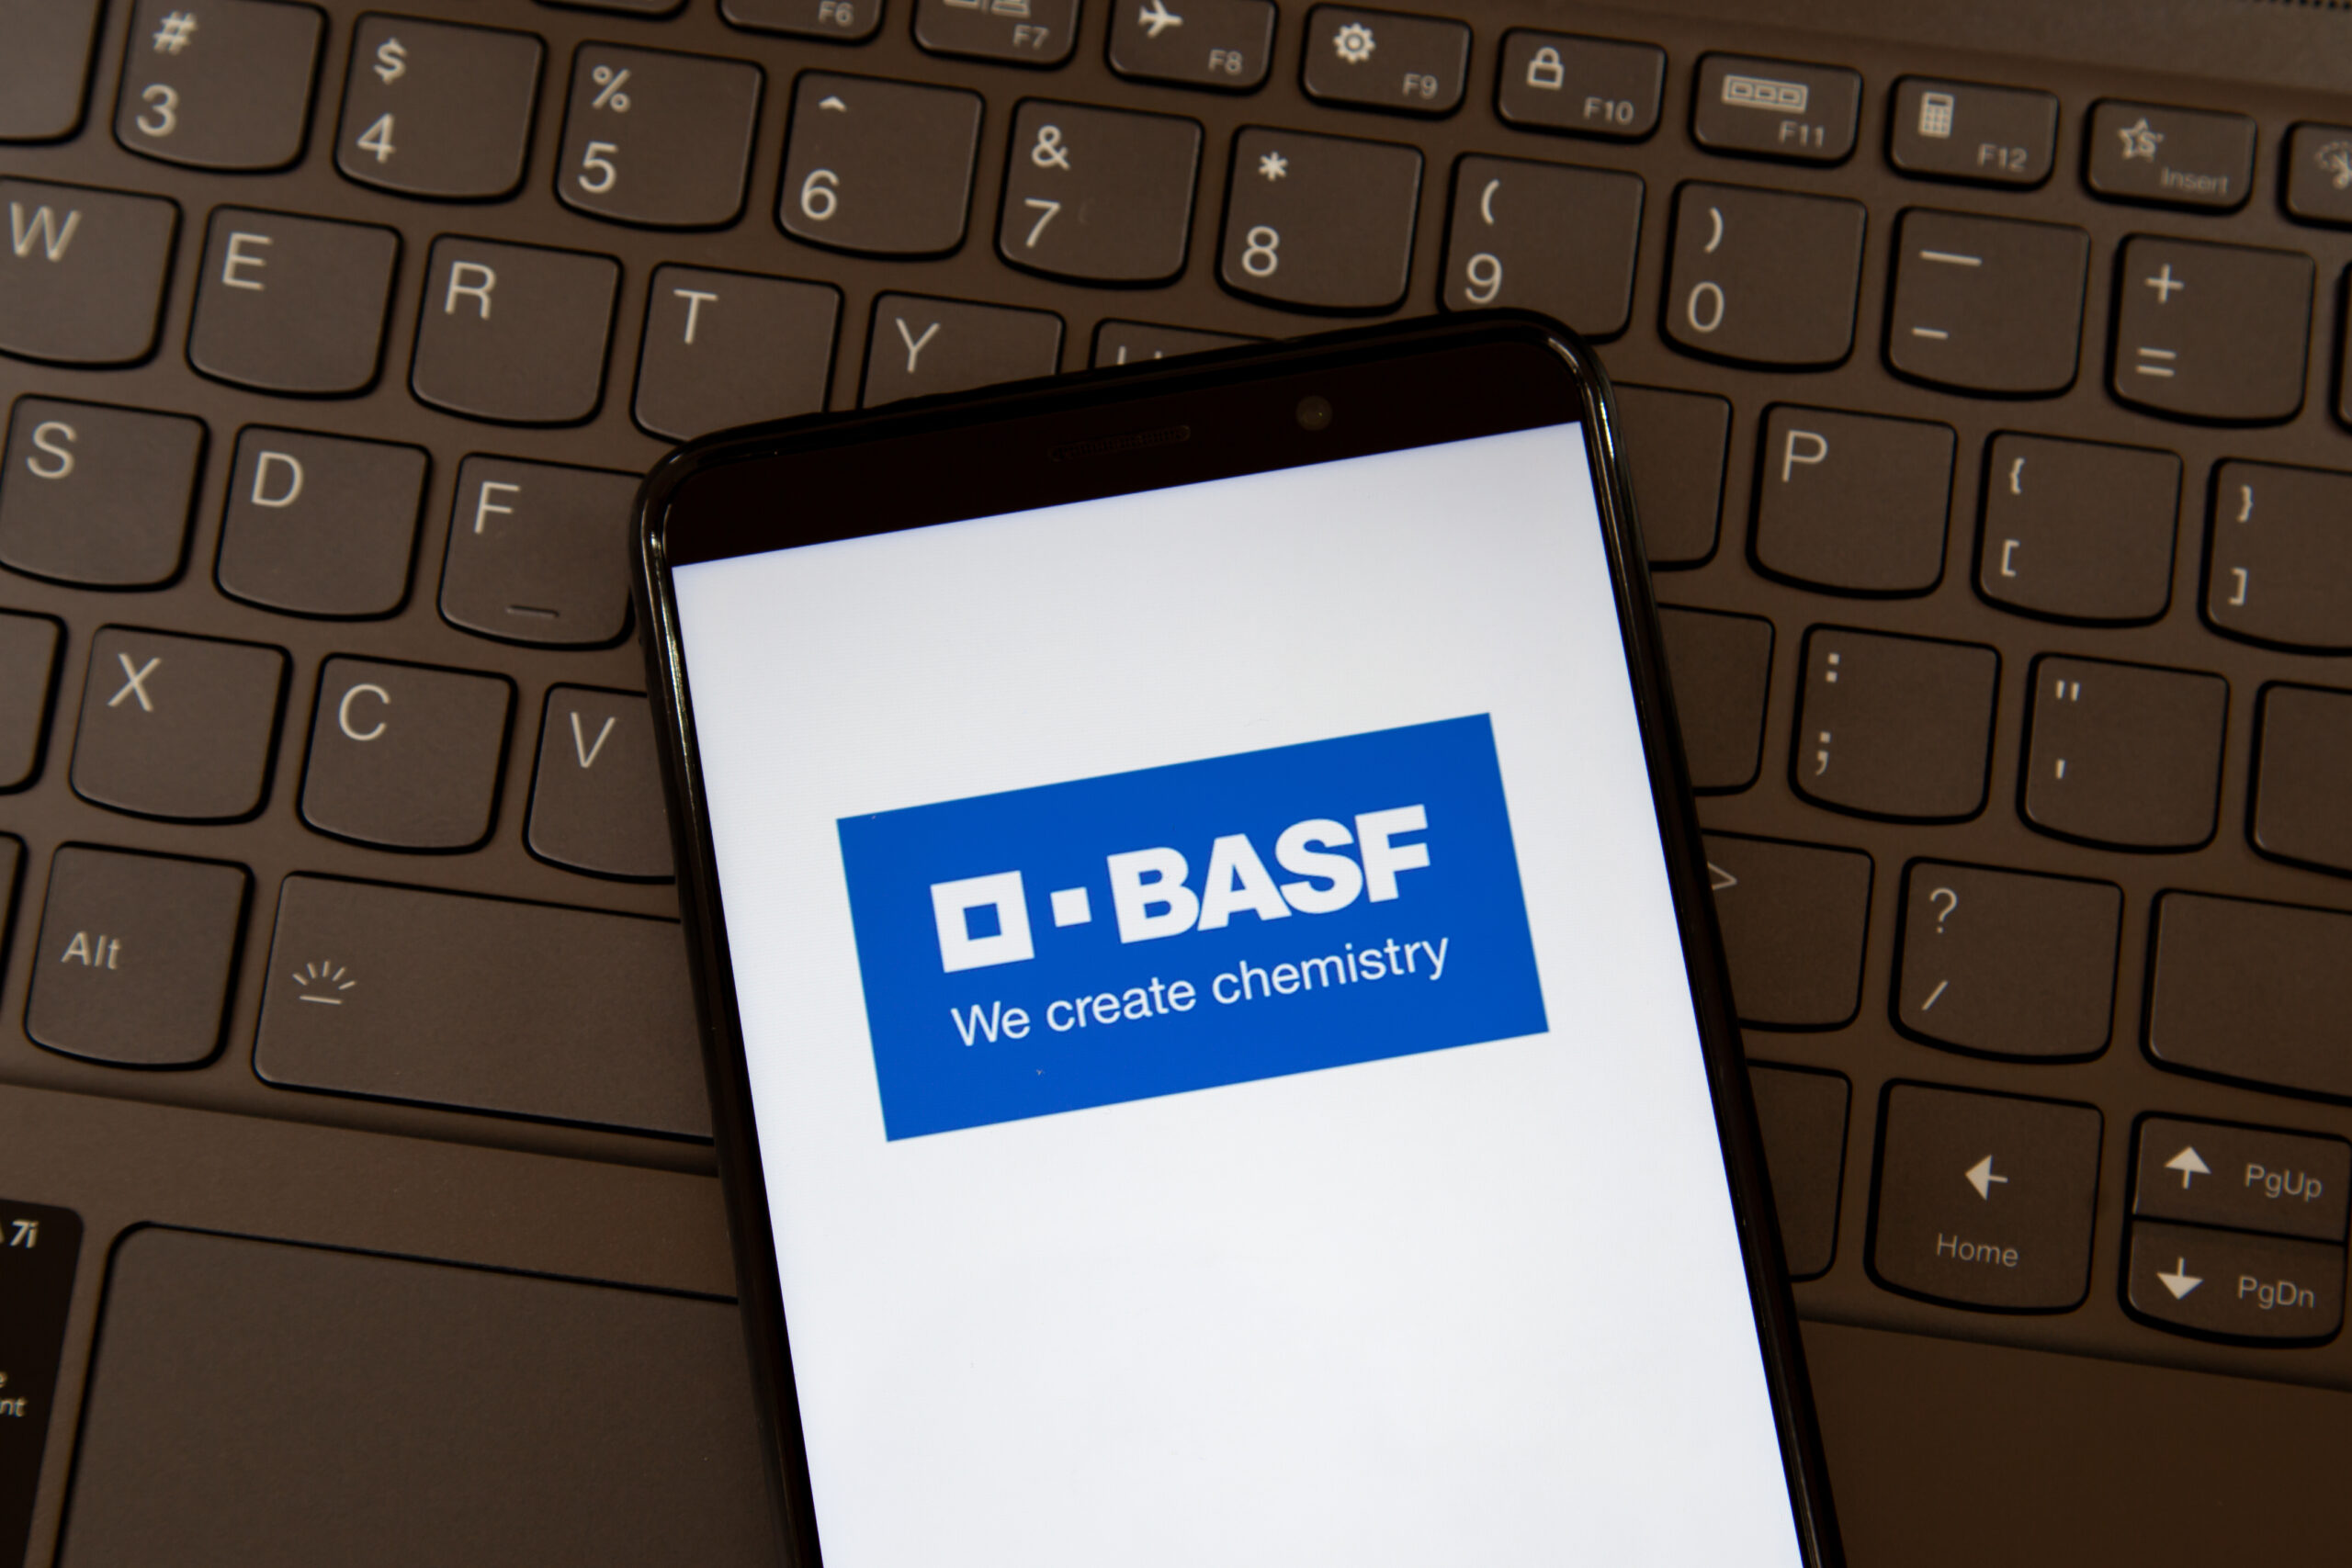 BASF-App-on-Smartphone-With-Laptop-Keyboard-in-Background